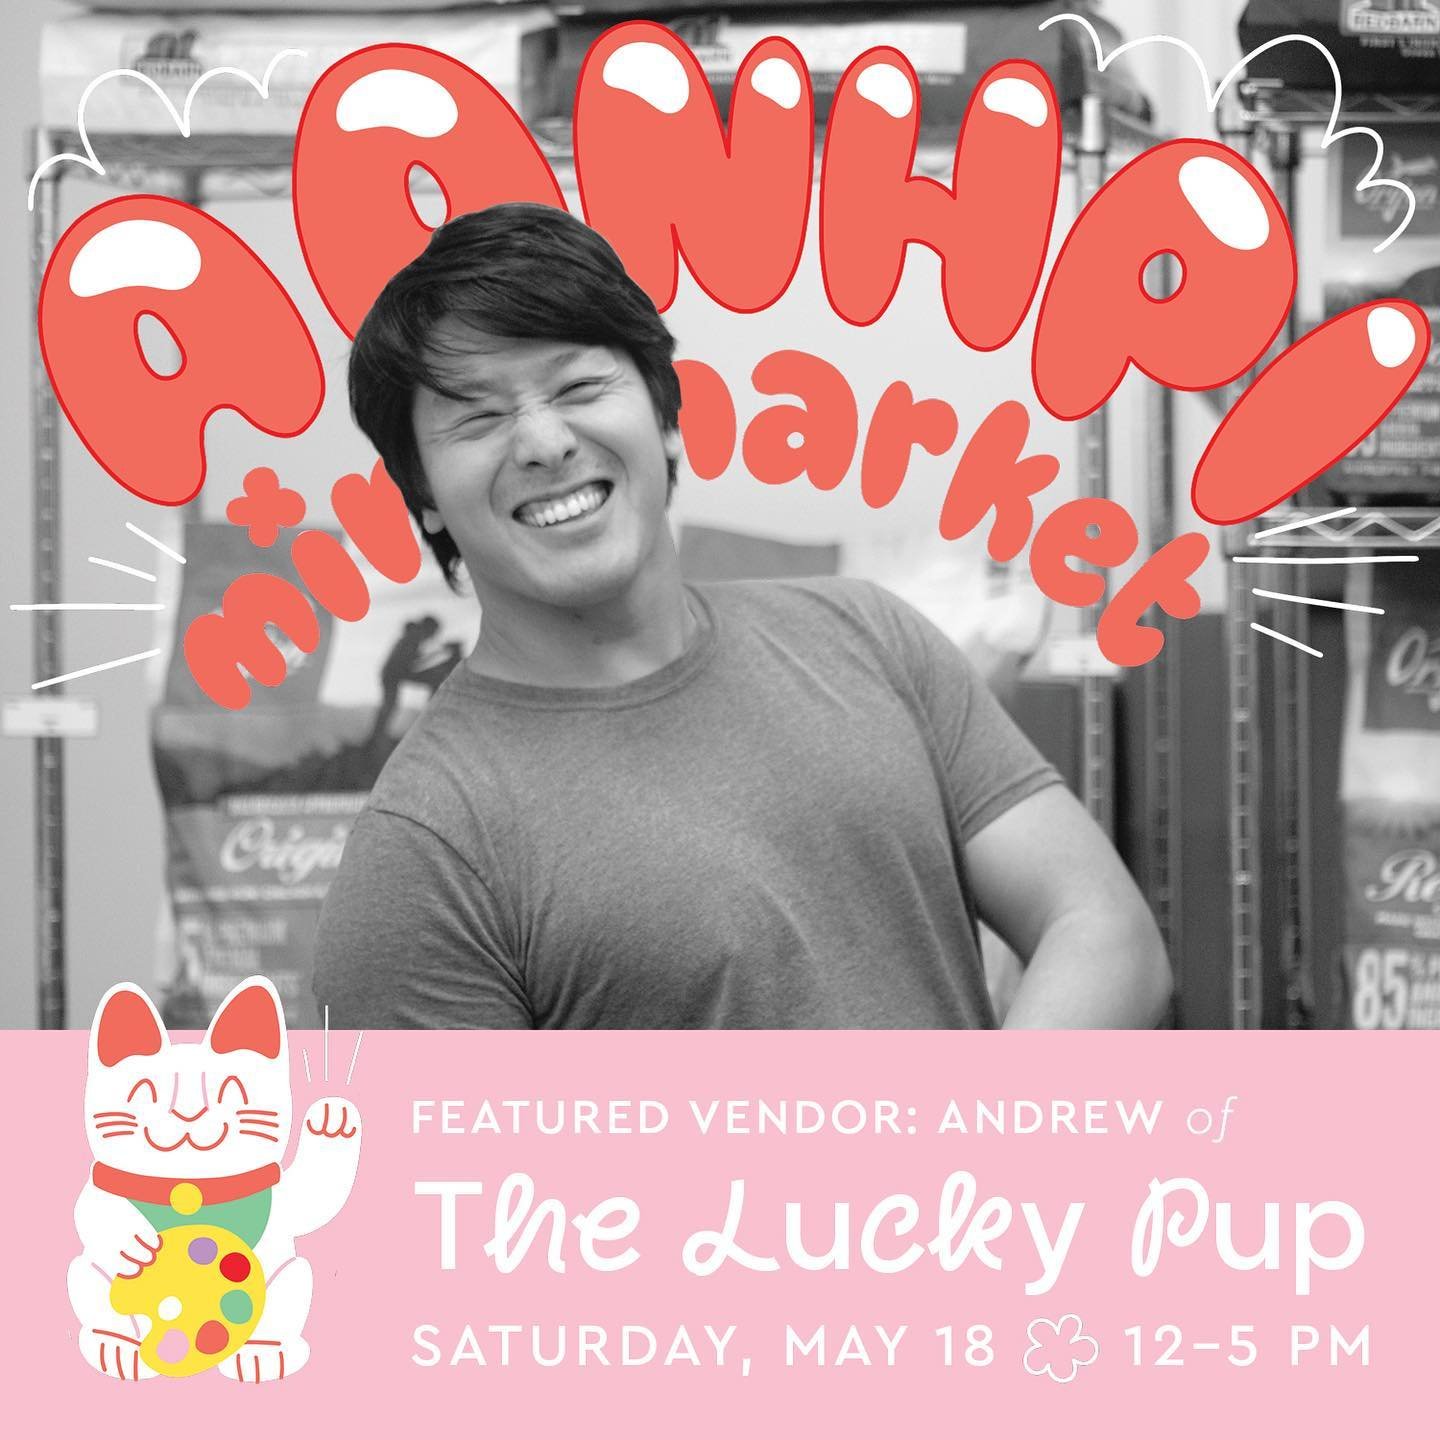 Meet another one of our featured vendors, Andrew of The Lucky Pup!

The Lucky Pup opened in September of 2022 for a few years with a desire to bring the highest quality food, chews, treats, and accessories to the Cambridge and Boston area. One of the